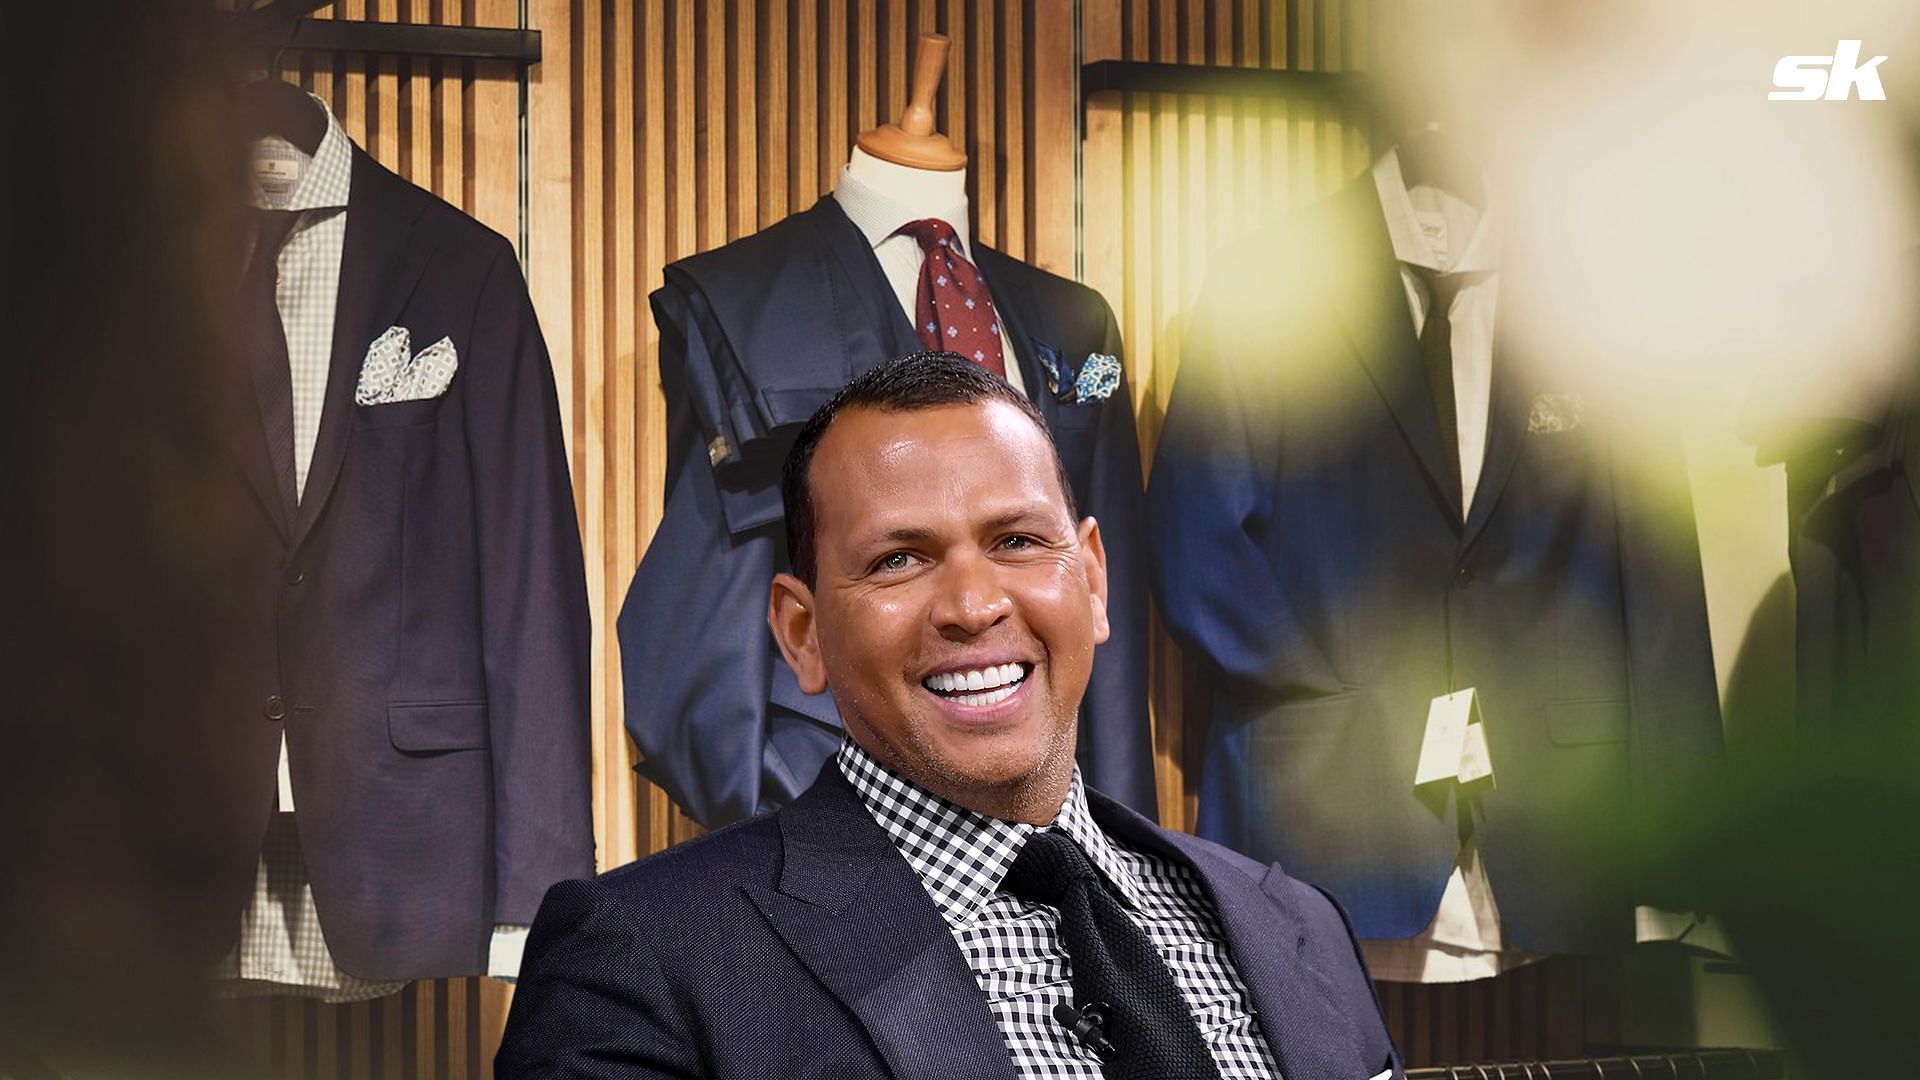 Yankees icon Alex Rodriguez demonstrates art of suiting up for MLB post-season